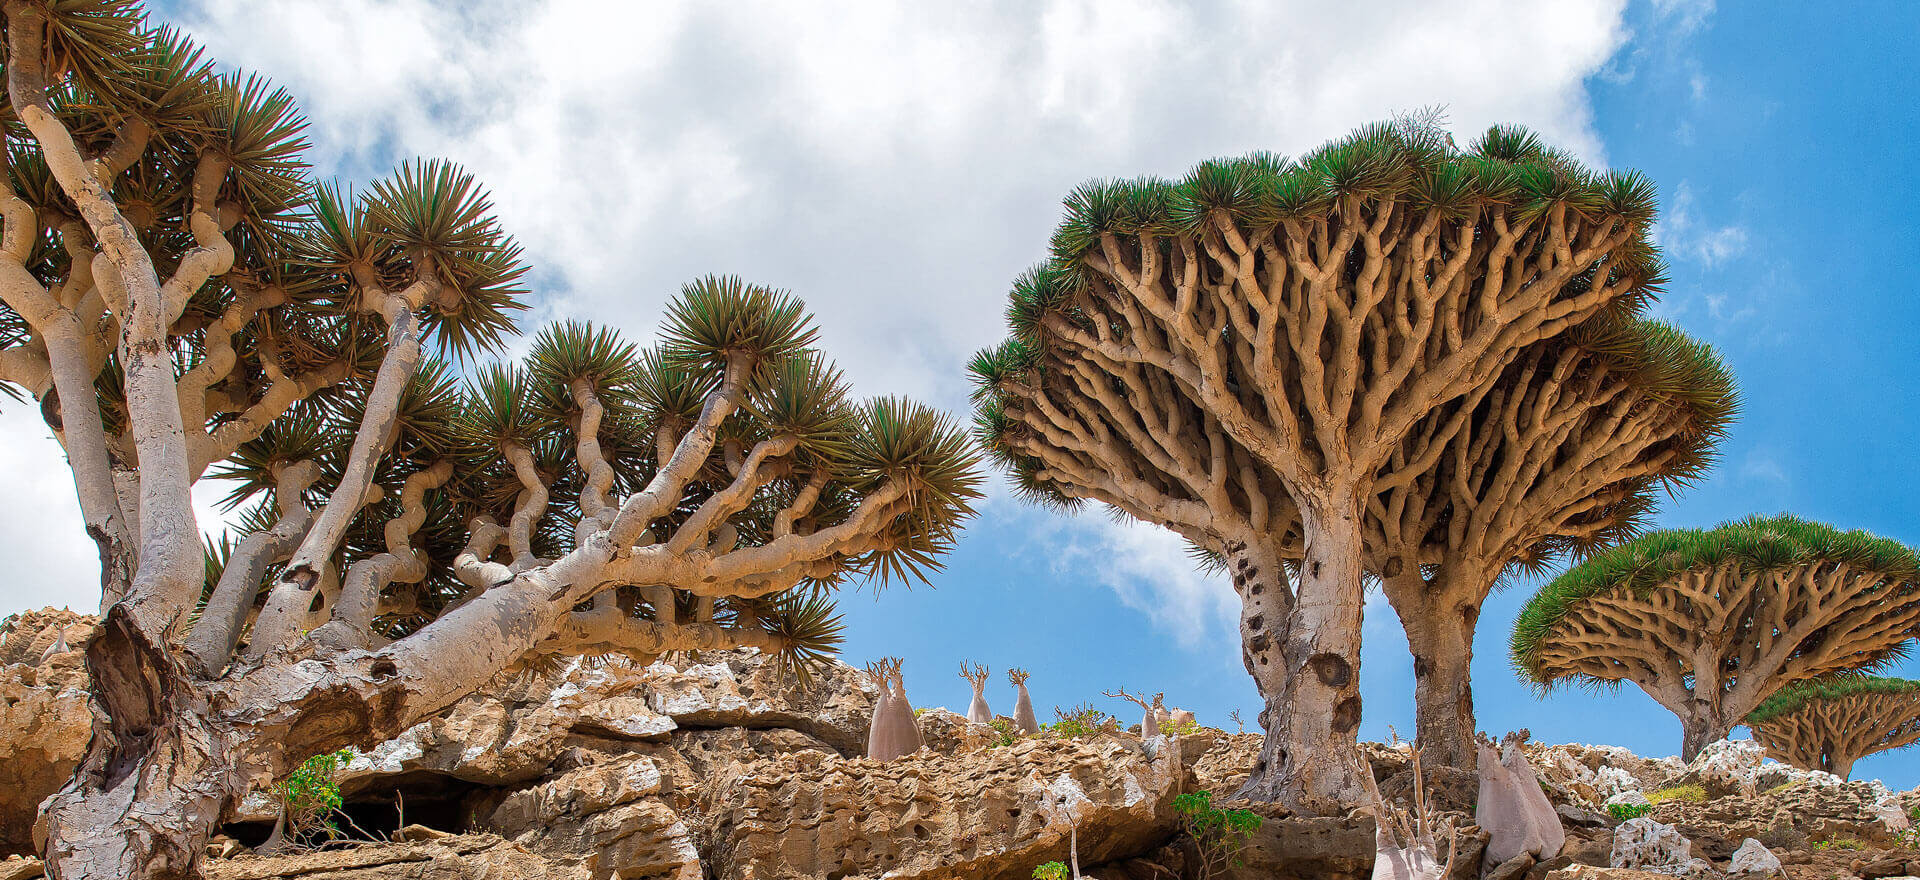 Socotra island dragon blood trees -small group tours - Yemen holidays and tours